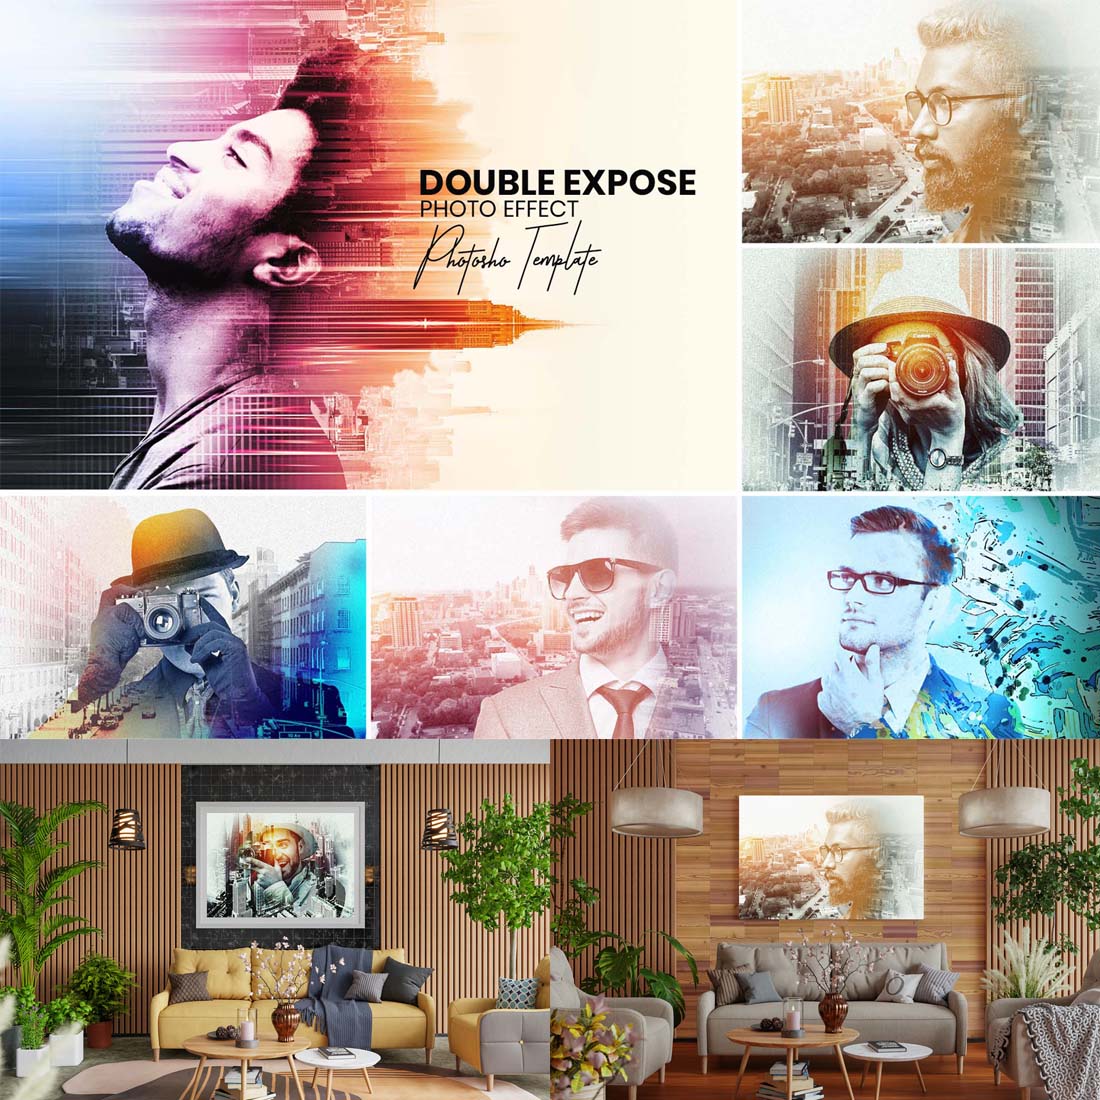 Double Exposure Effect in Photoshop cover image.